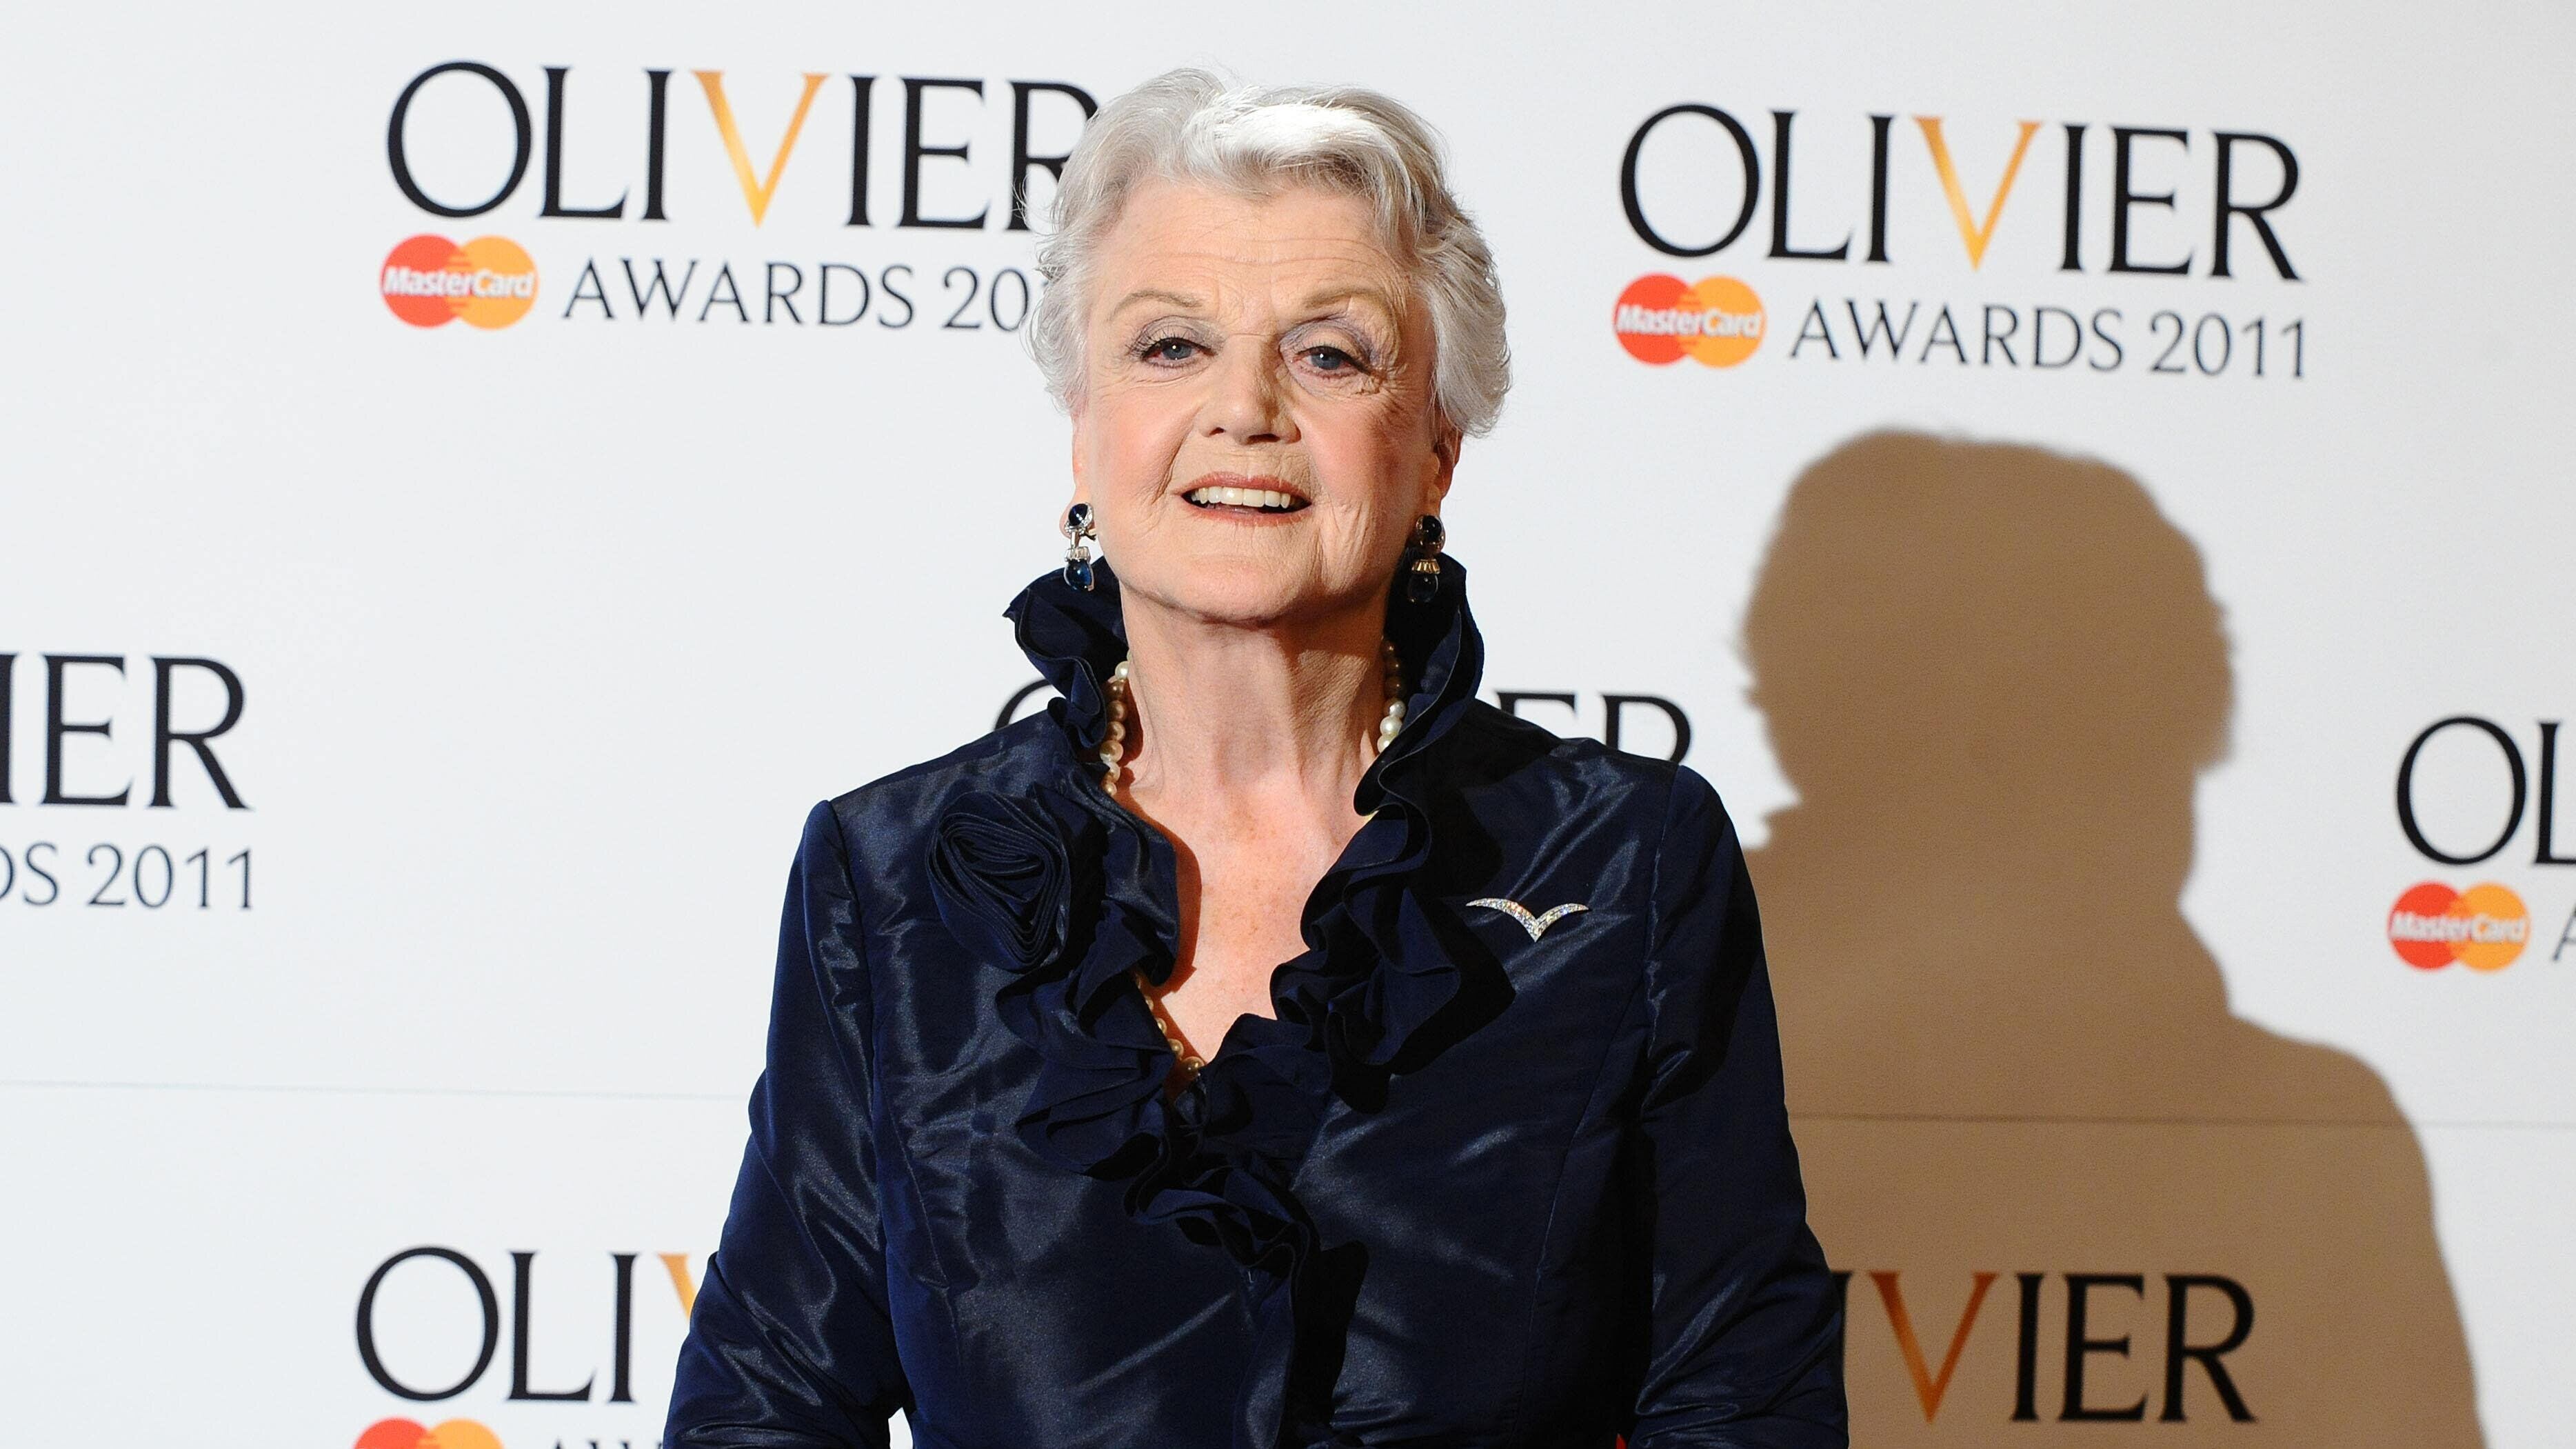 The actress was best known for her portrayal of Jessica Fletcher in the American drama series.